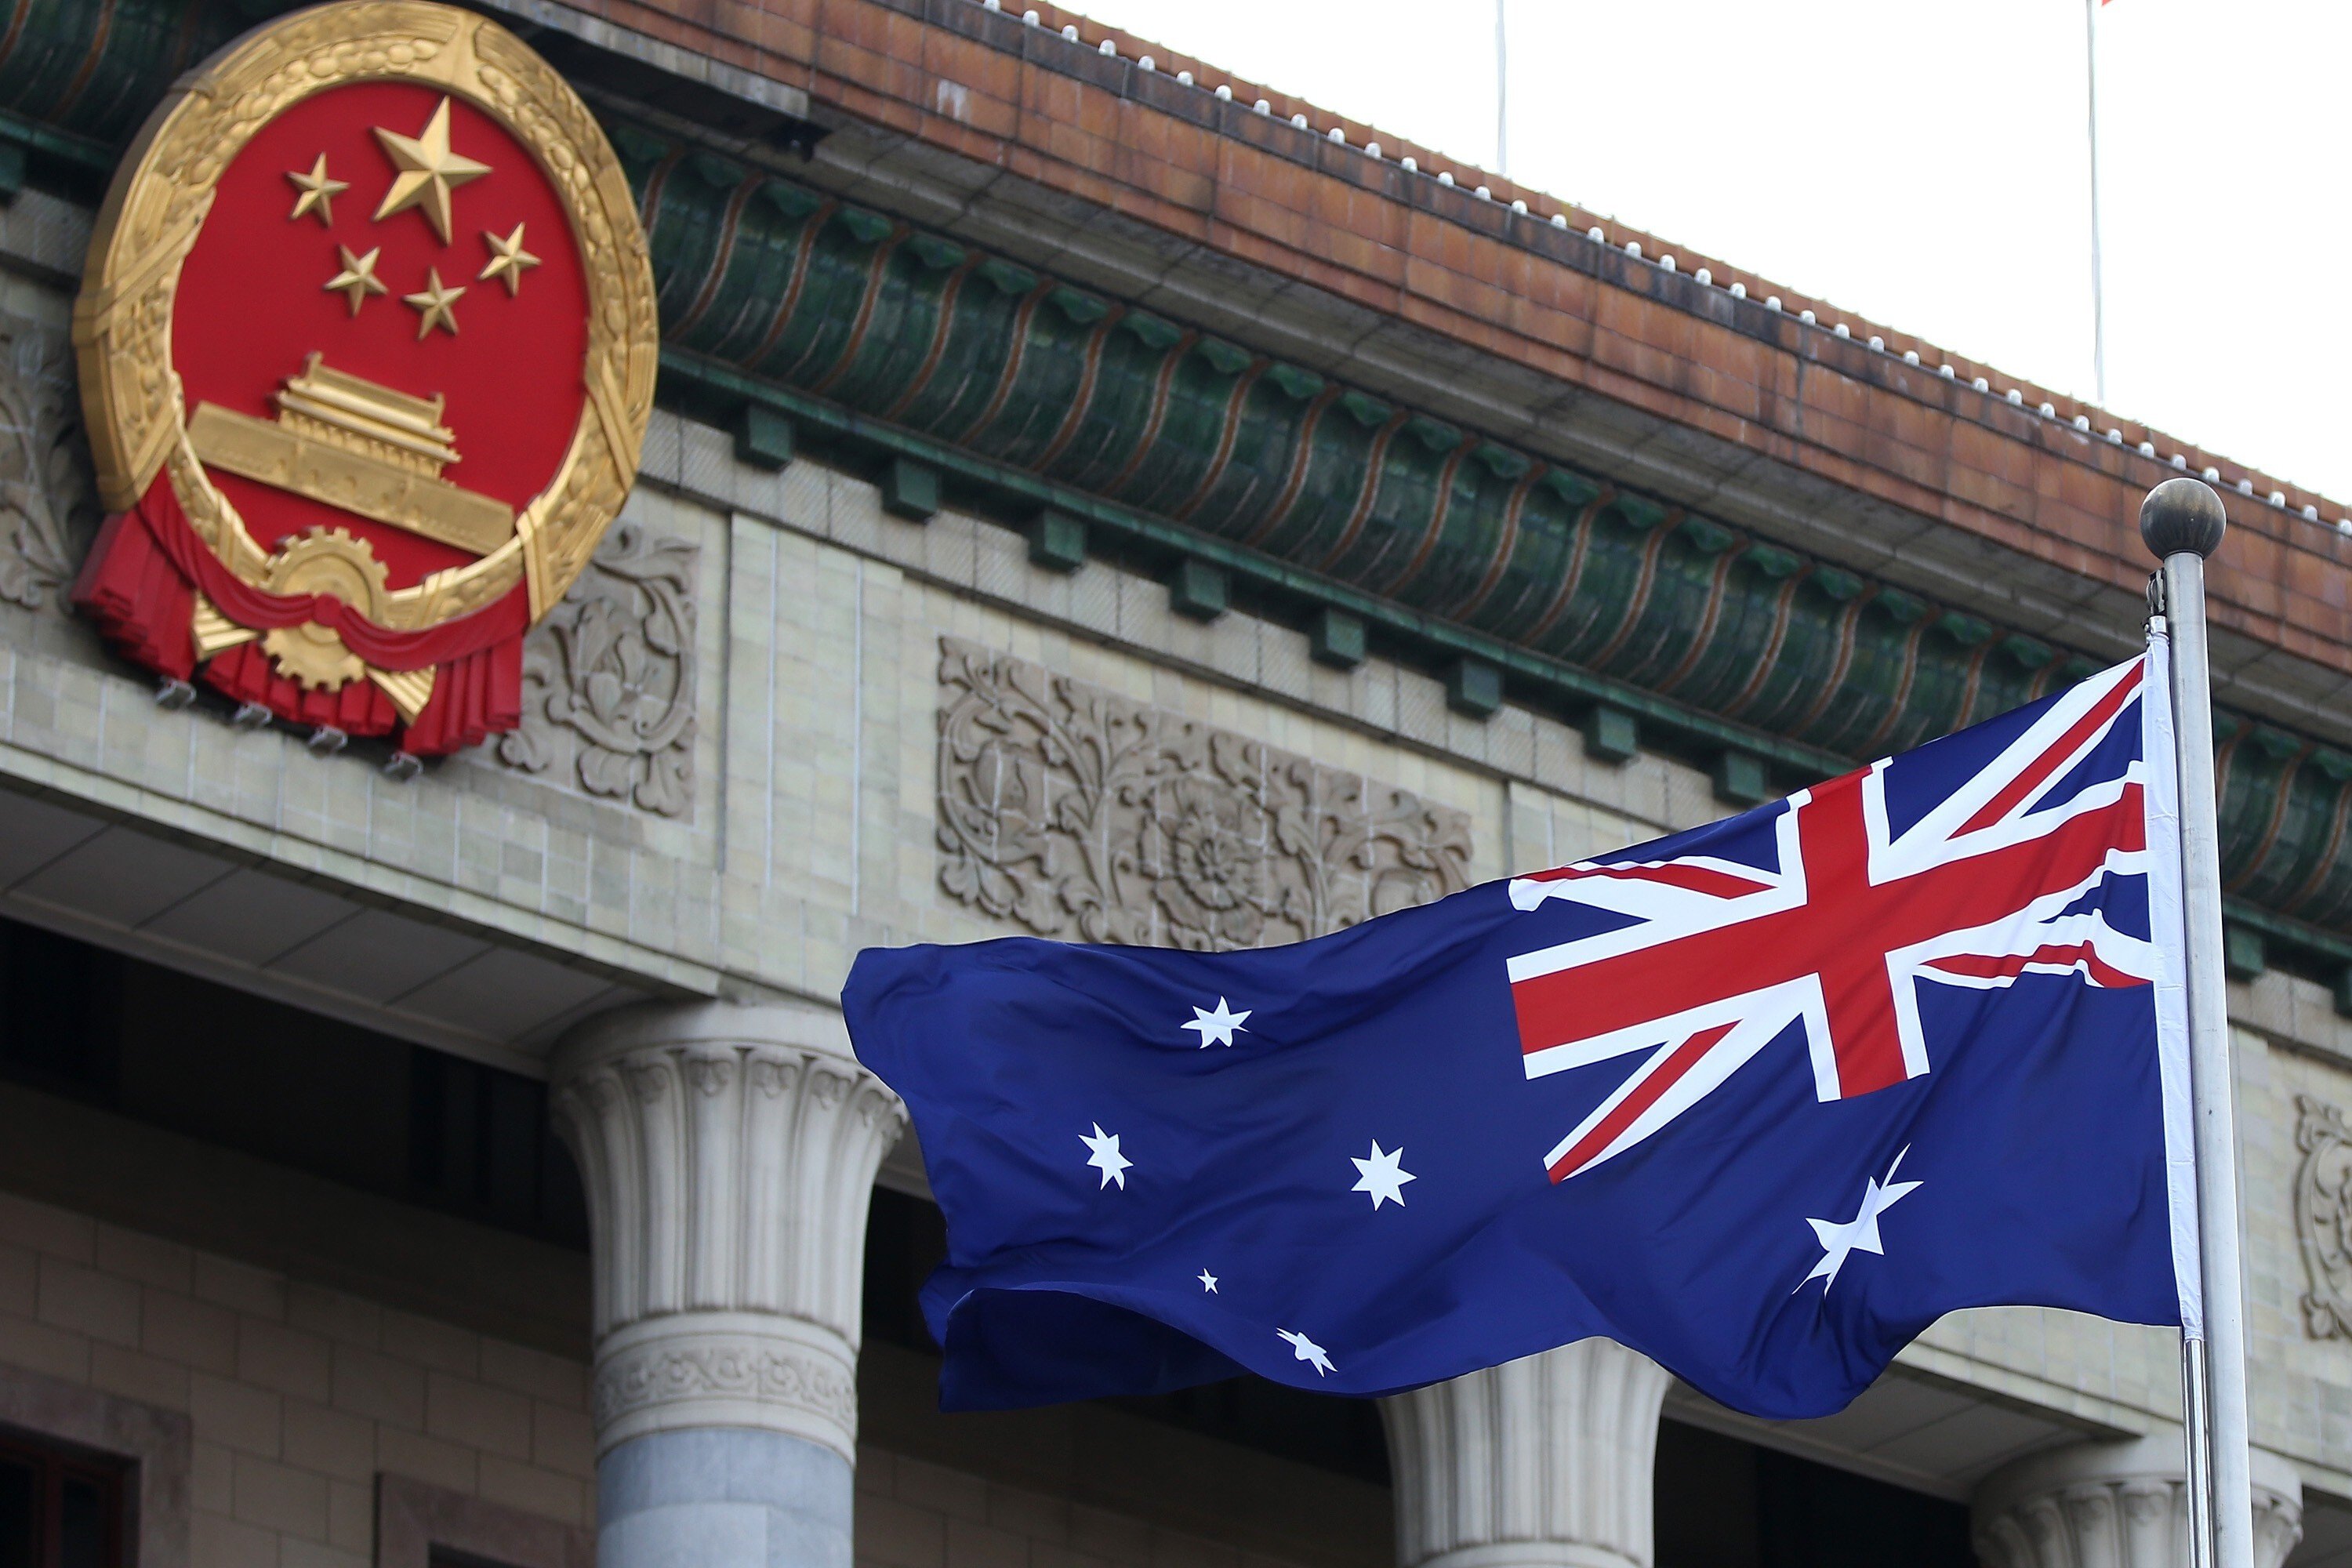 Australia’s envoy to Beijing has said his country does not follow the US on all China-related issues, according to the editor of Chinese state-owned tabloid Global Times.